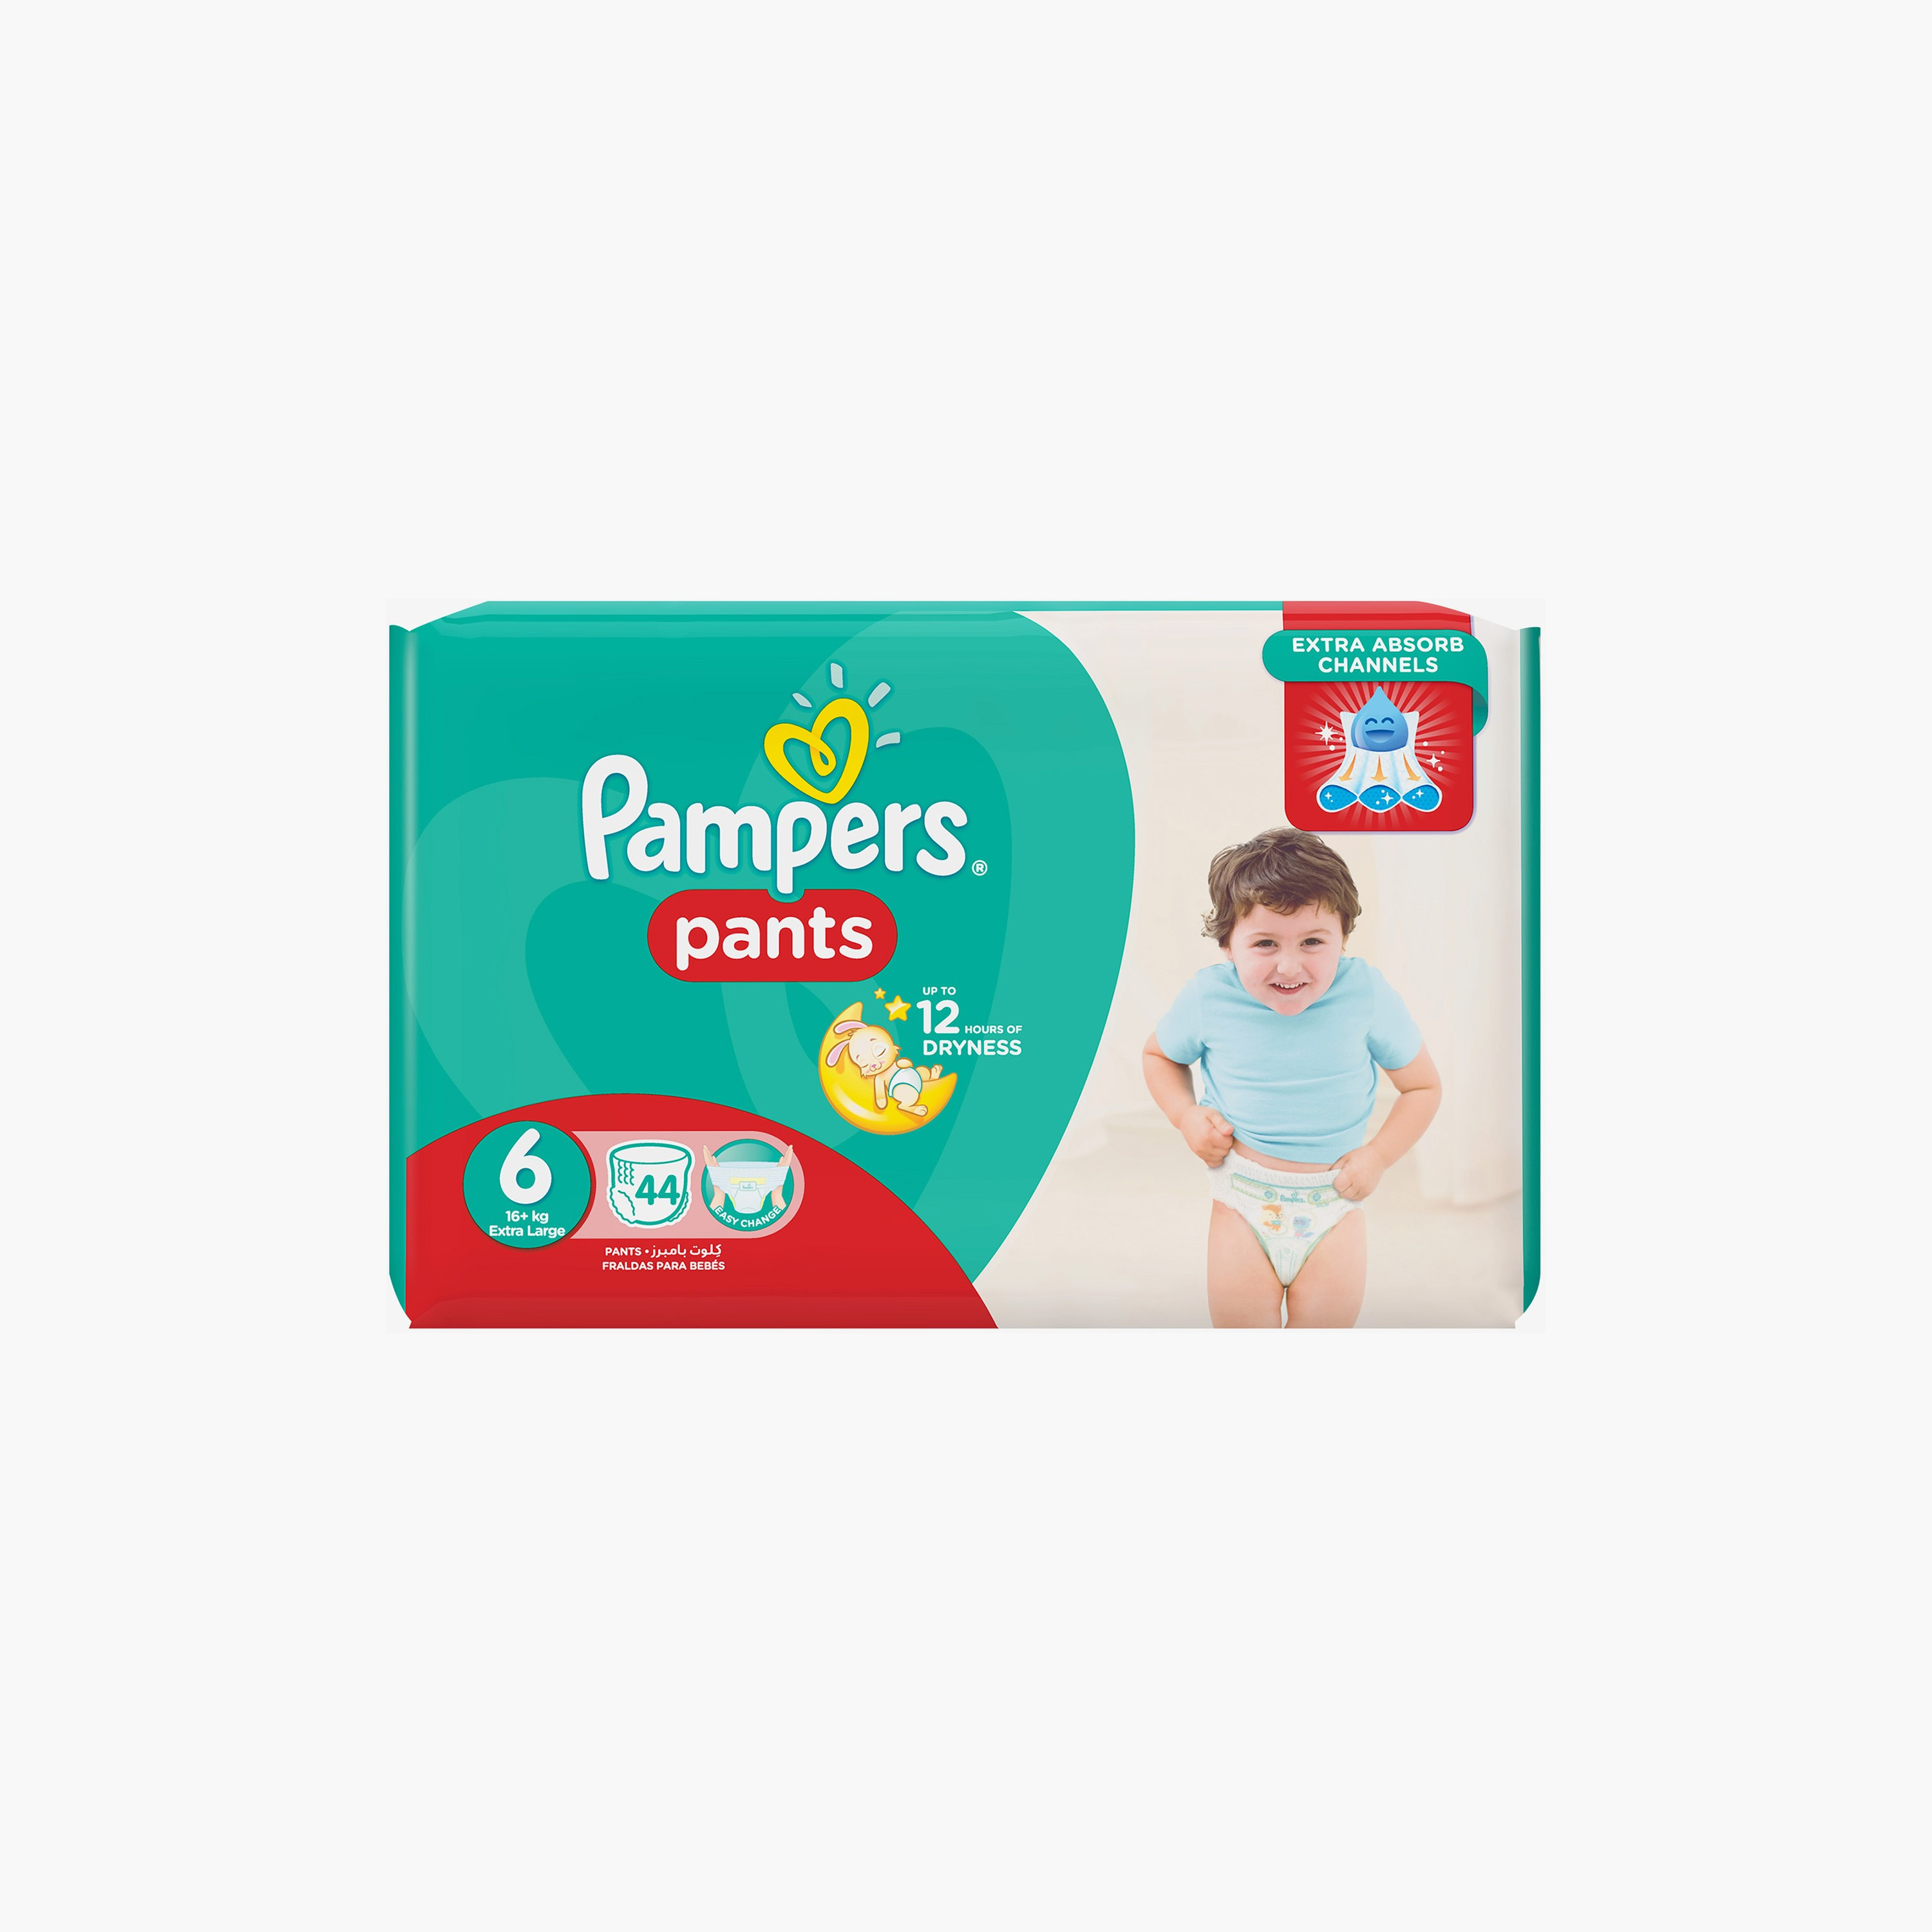 NEW Pampers Pants with 2-in-1 Rash Shield - YouTube